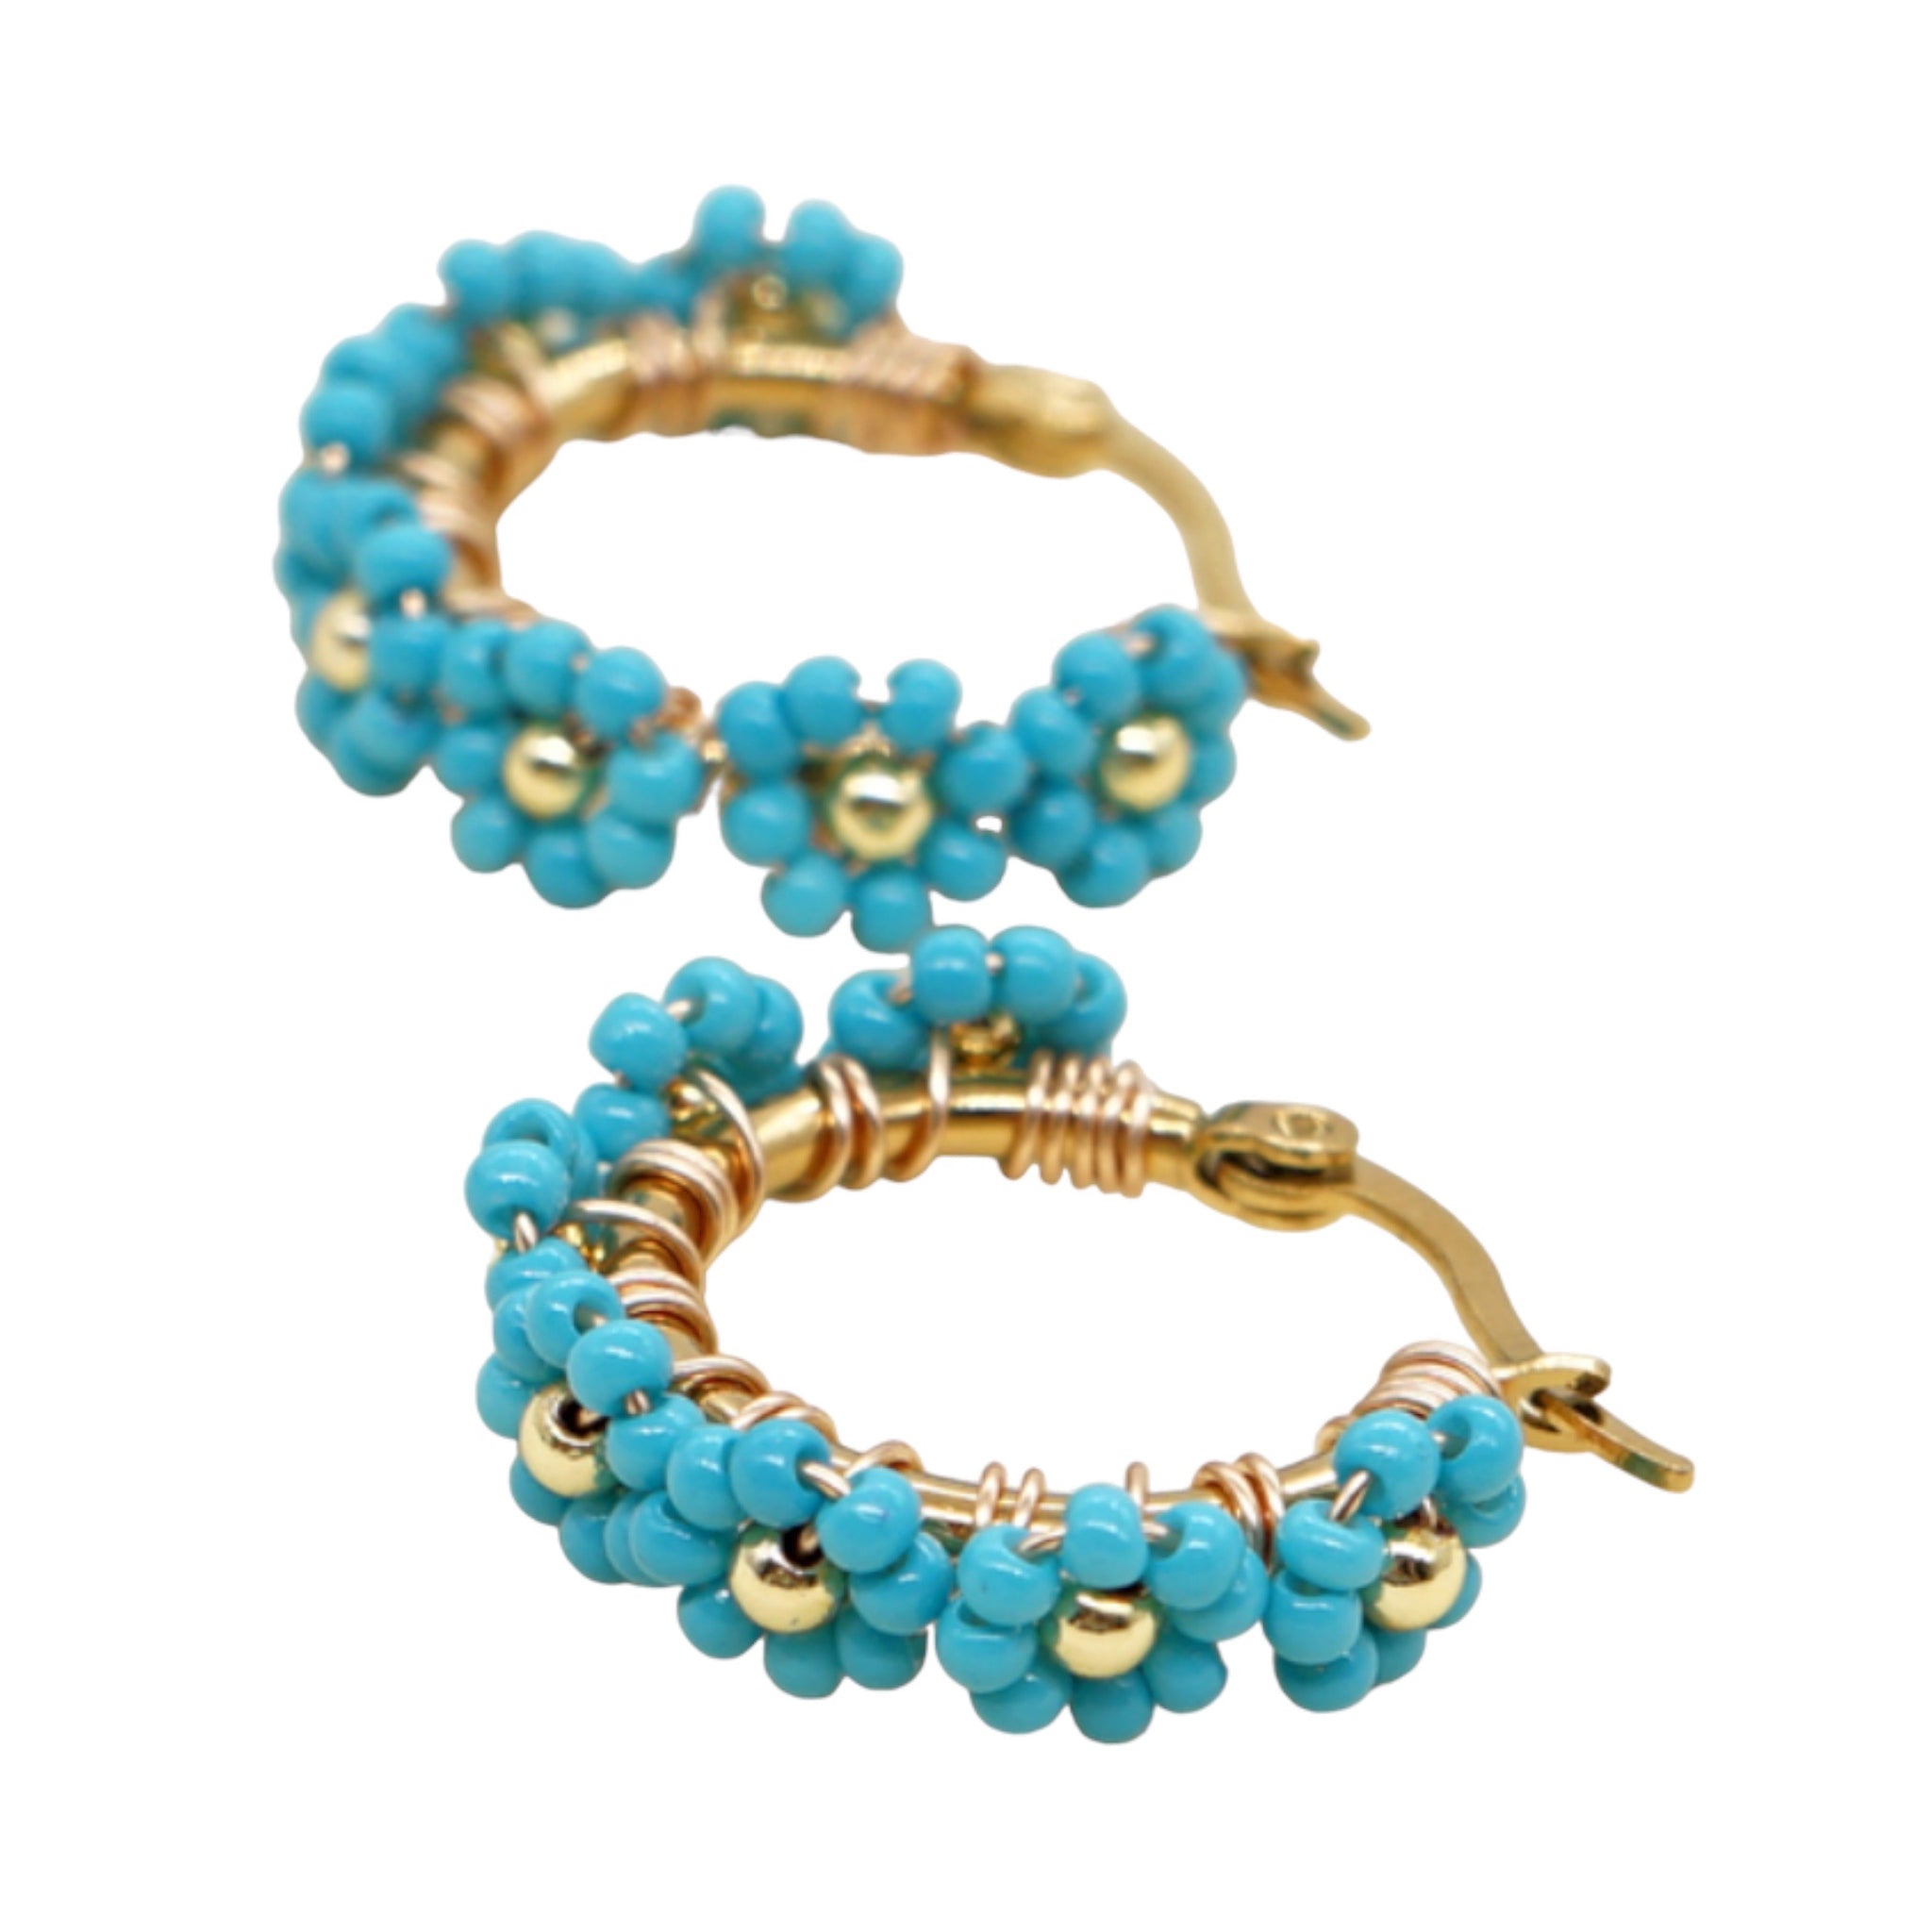 Flower Hoop | Turquoise Blue, the best gift and gifts for him and for her from Inna Carton, the best online gift store in Dubai, UAE.